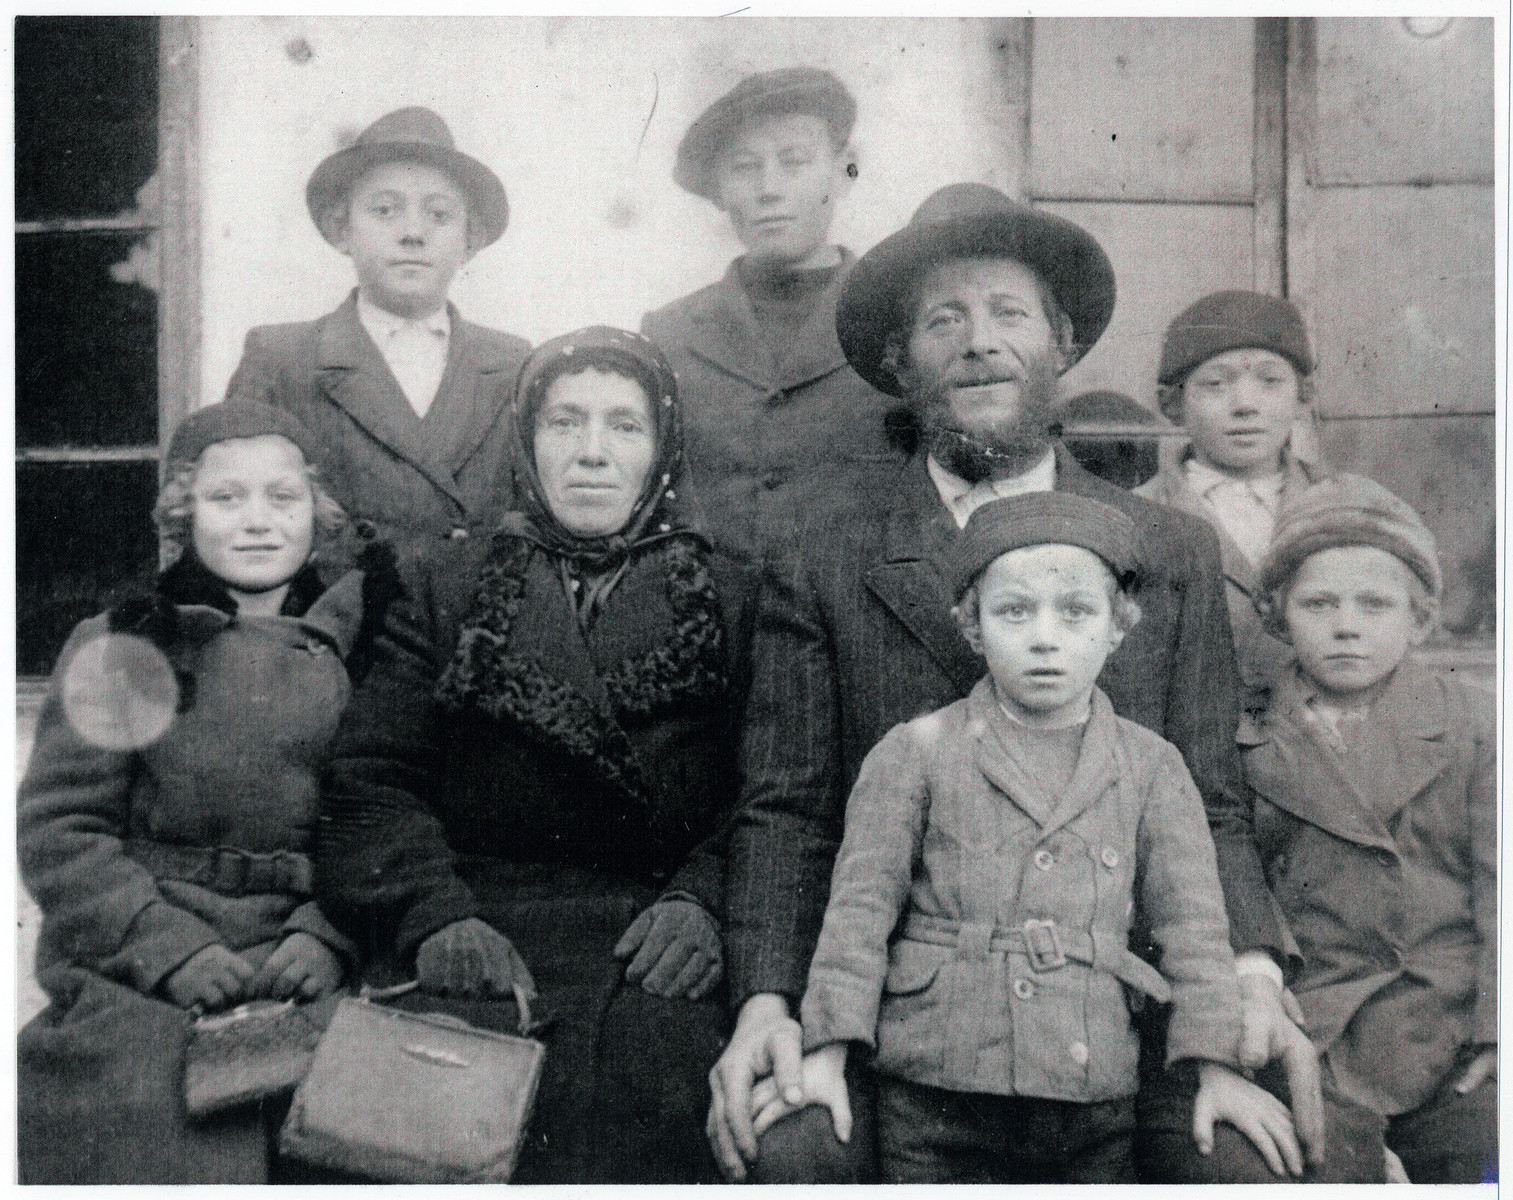 Portrait of a religious Transcarpathian Jewish farmer, his wife and six of his children.

The farmer, Chaim Simcha Mechlowitz, became immortalized as the farmer in Roman Vishniac's collection "A Vanished World."